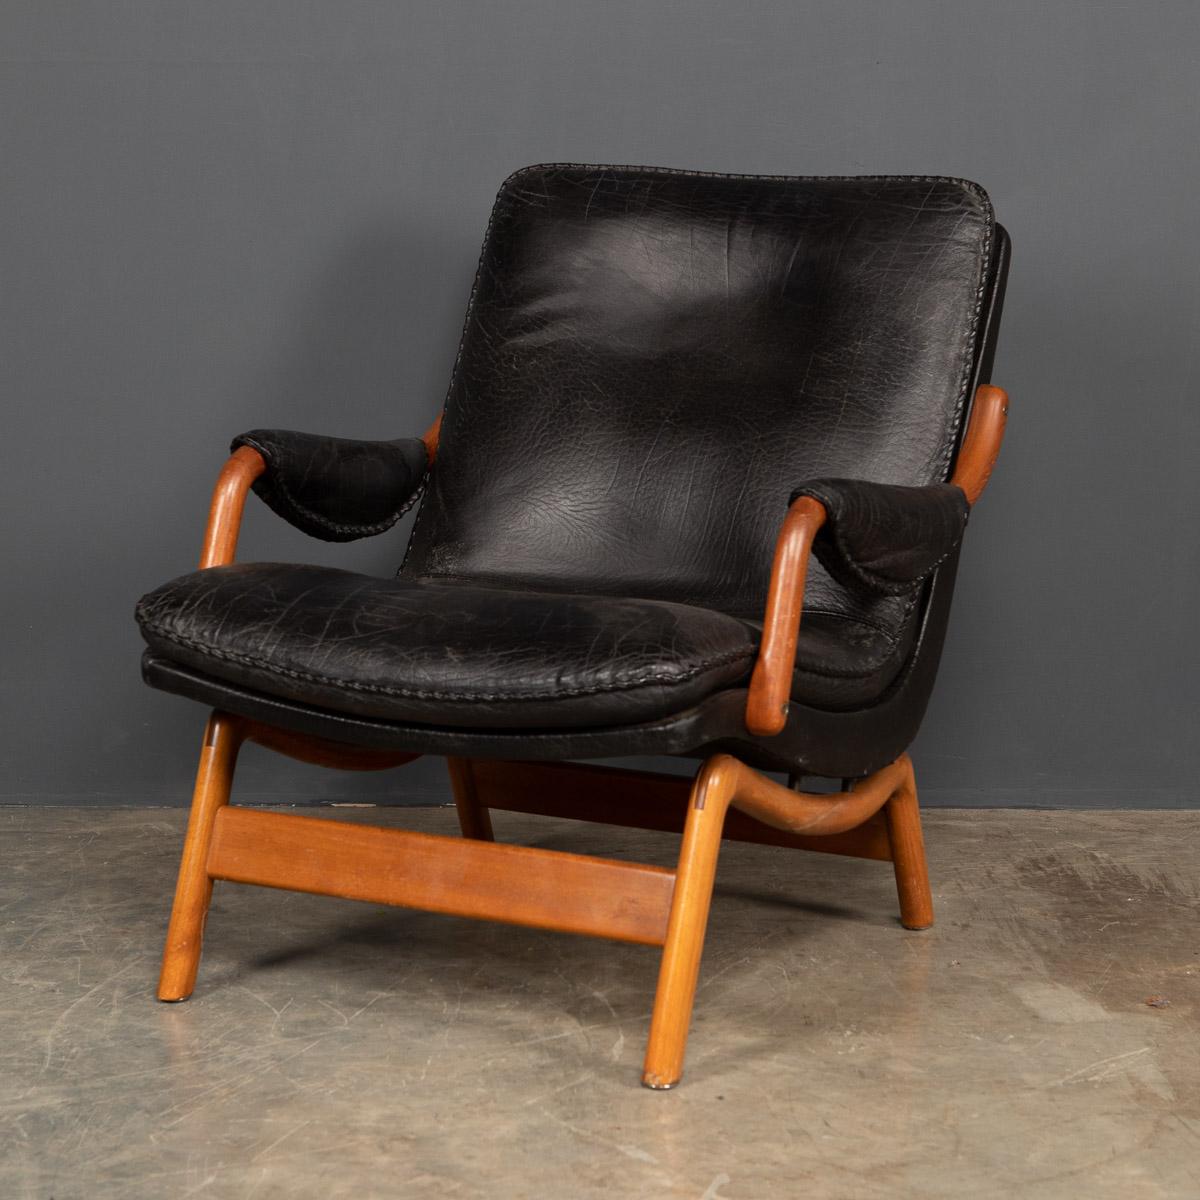 Very stylish chair, made by Ikea from the 1960's. This very comfortable chair has a teak frame and black leather seating with a good patination and a hand-stitch detail to the cushion.

Measures: Height: 84cm
Depth: 90cm
Width: 86m.